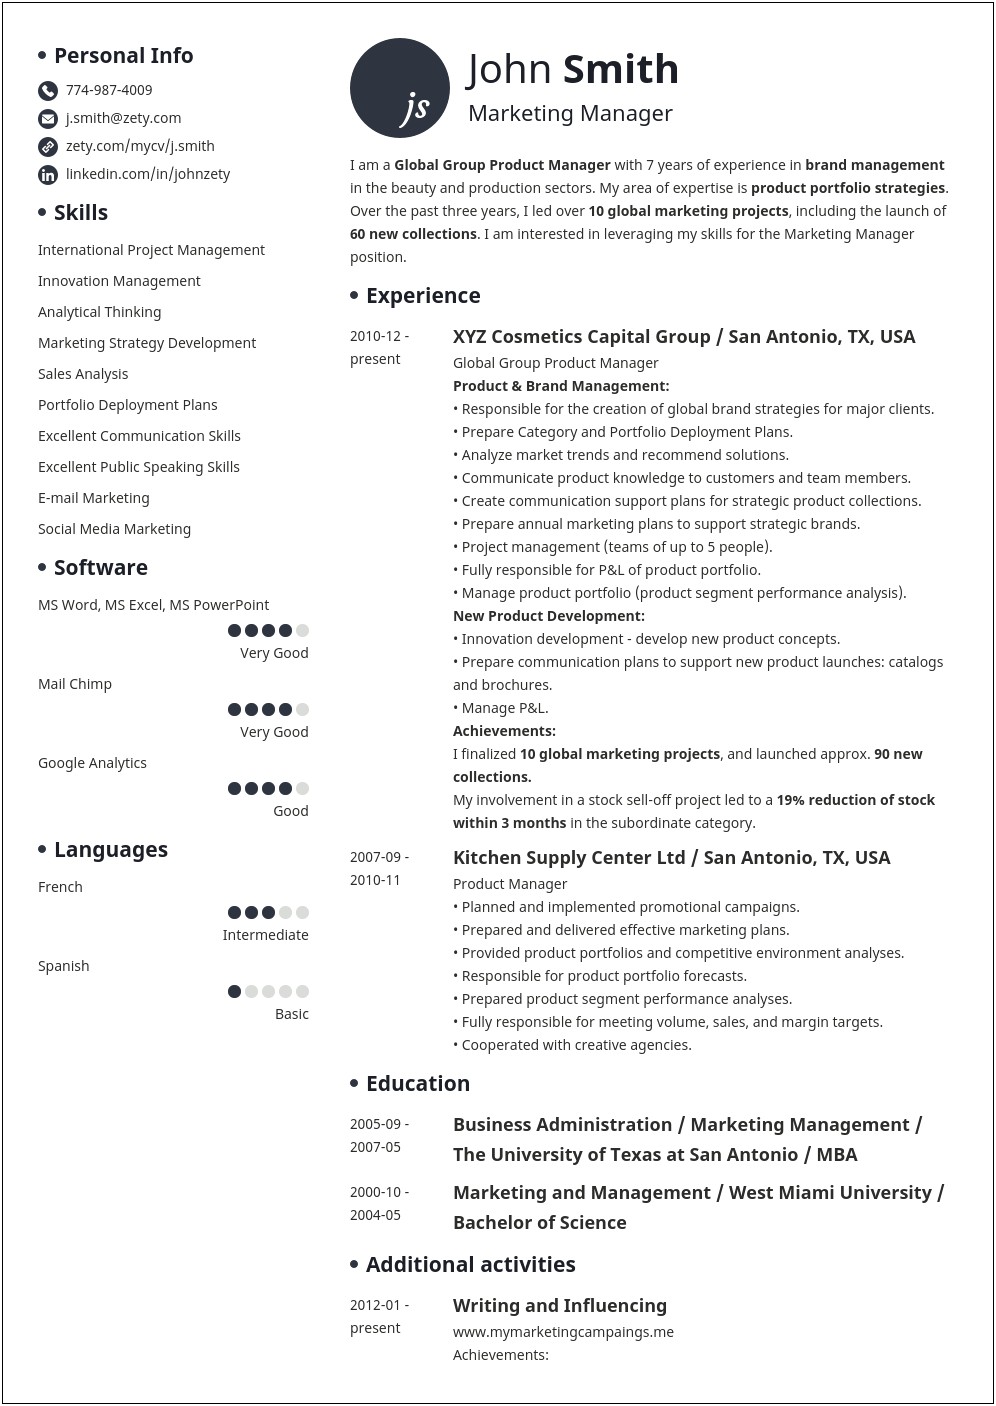 Sample Resume With Only High School Education